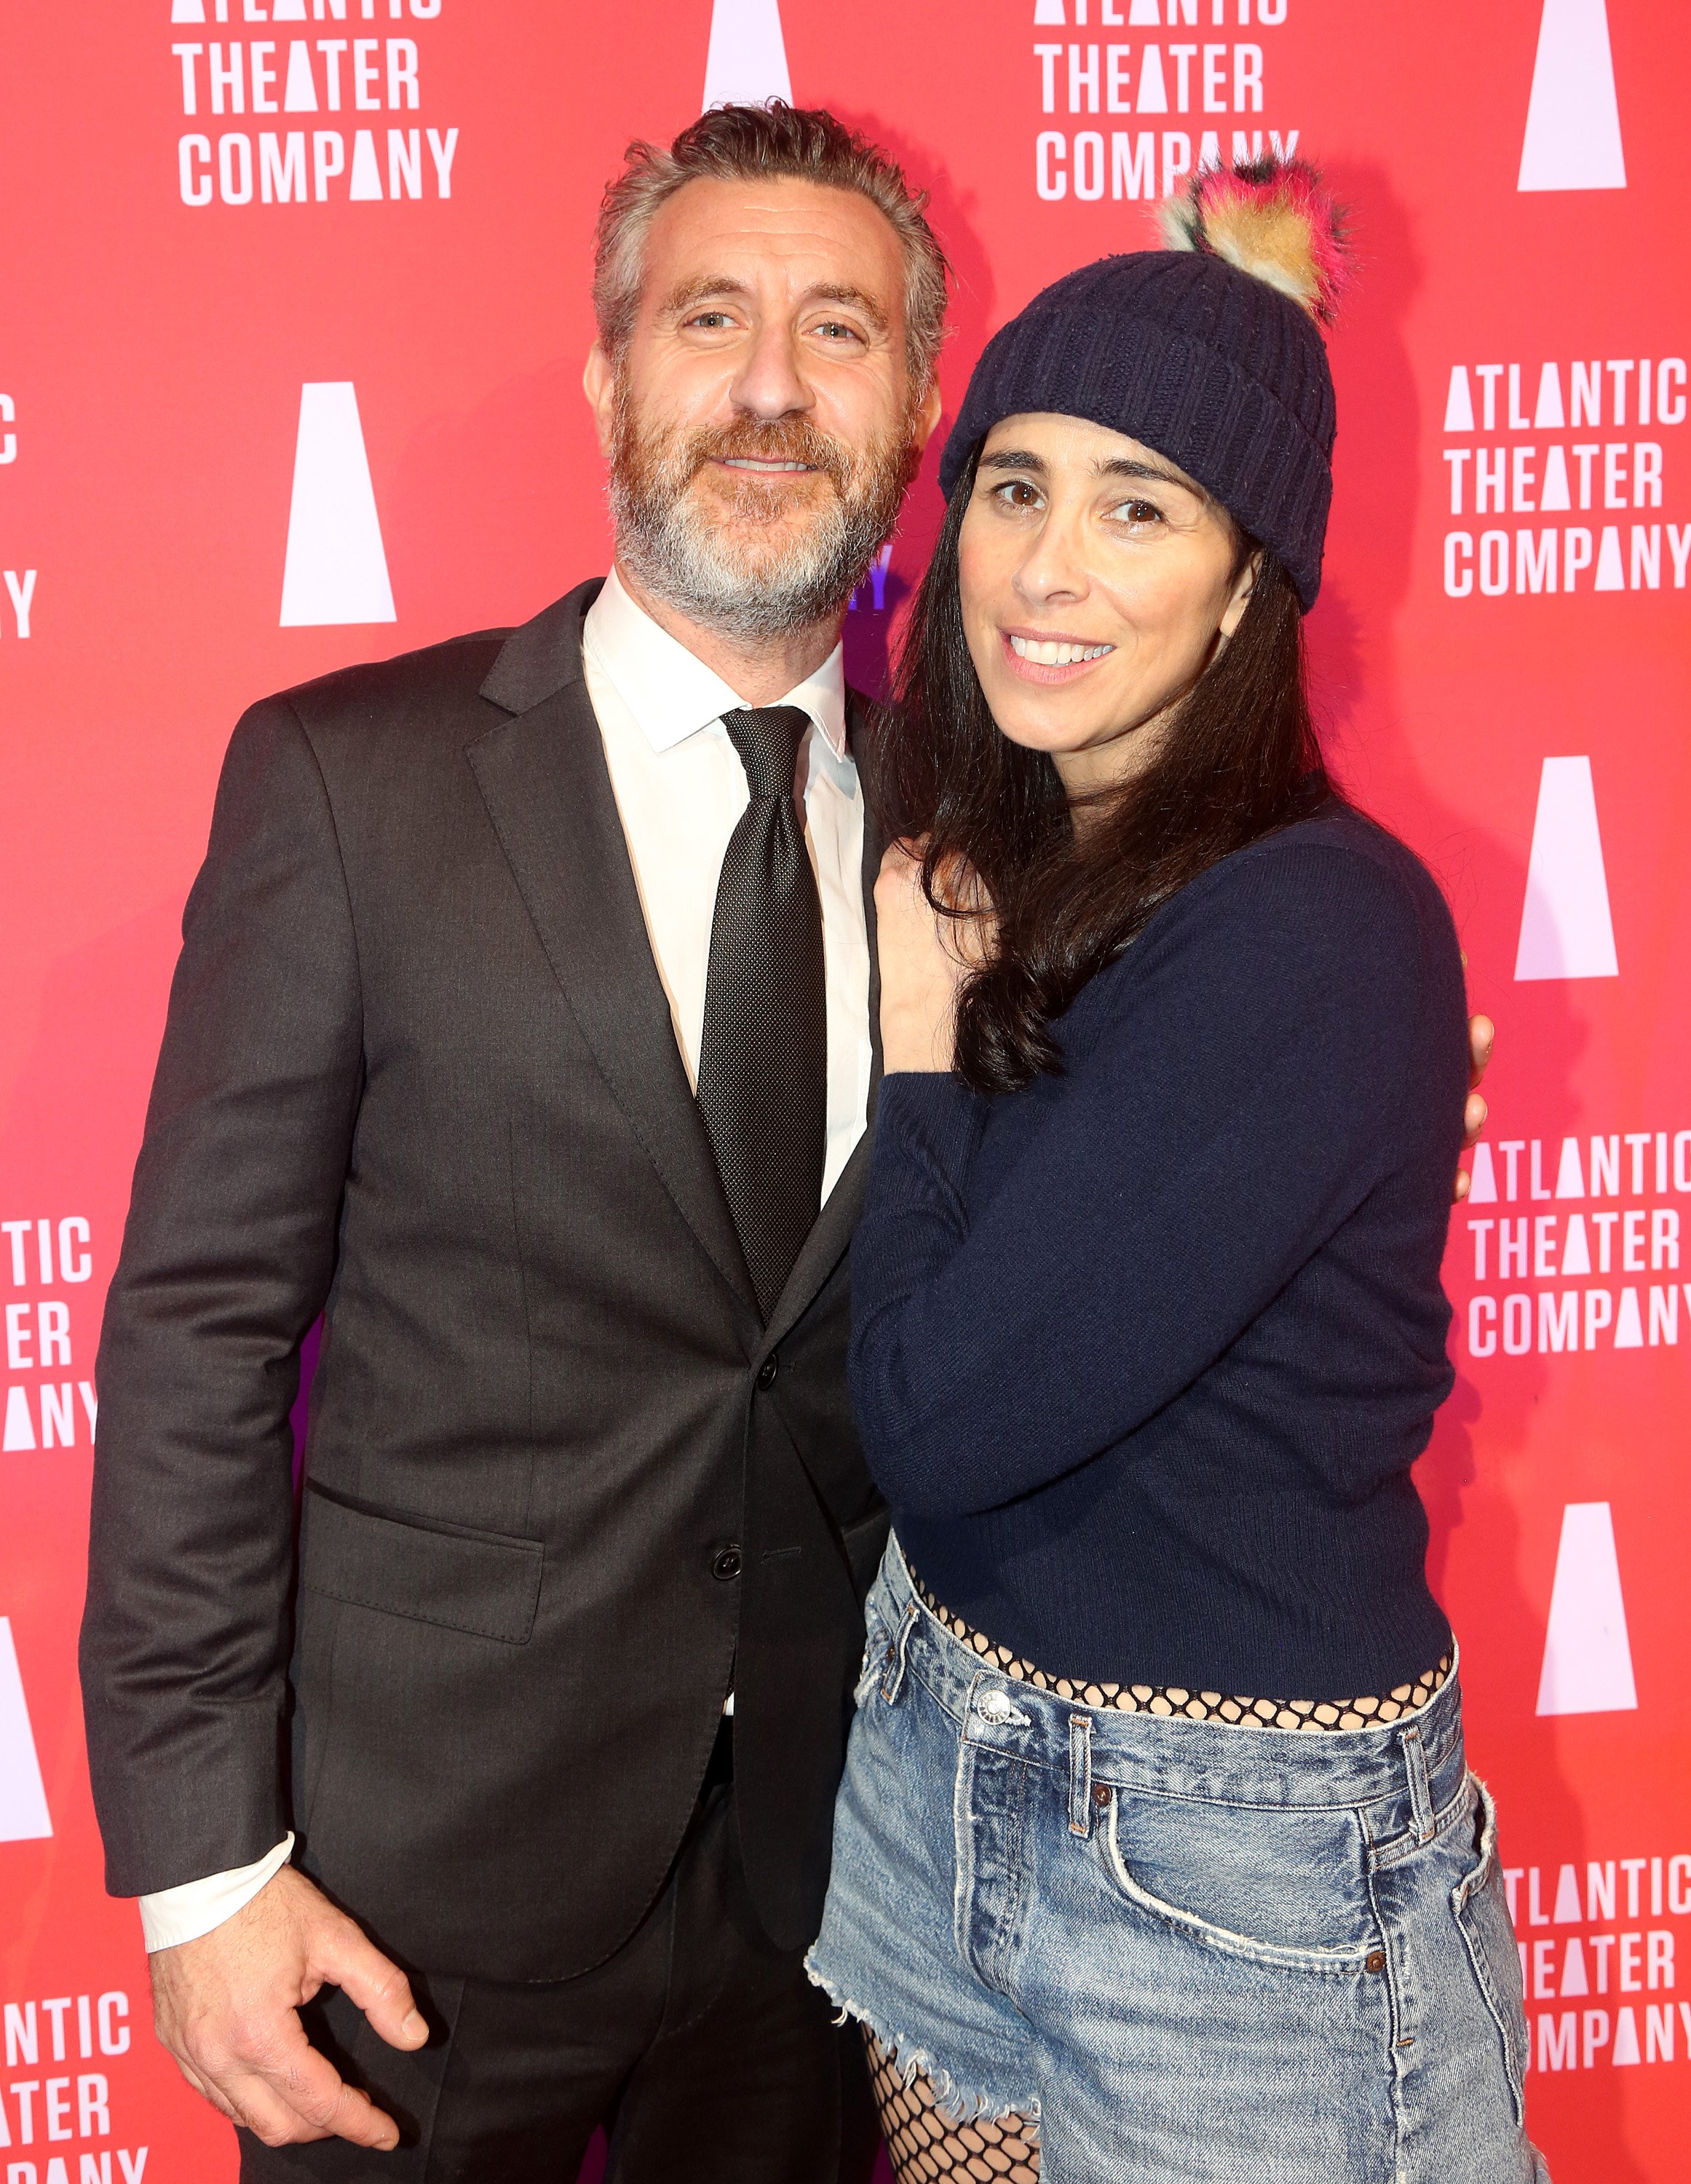 Rory Albanese and Sarah Silverman at The Atlantic Theater Company Theater on May 23, 2022, in New York City. | Source: Getty Images